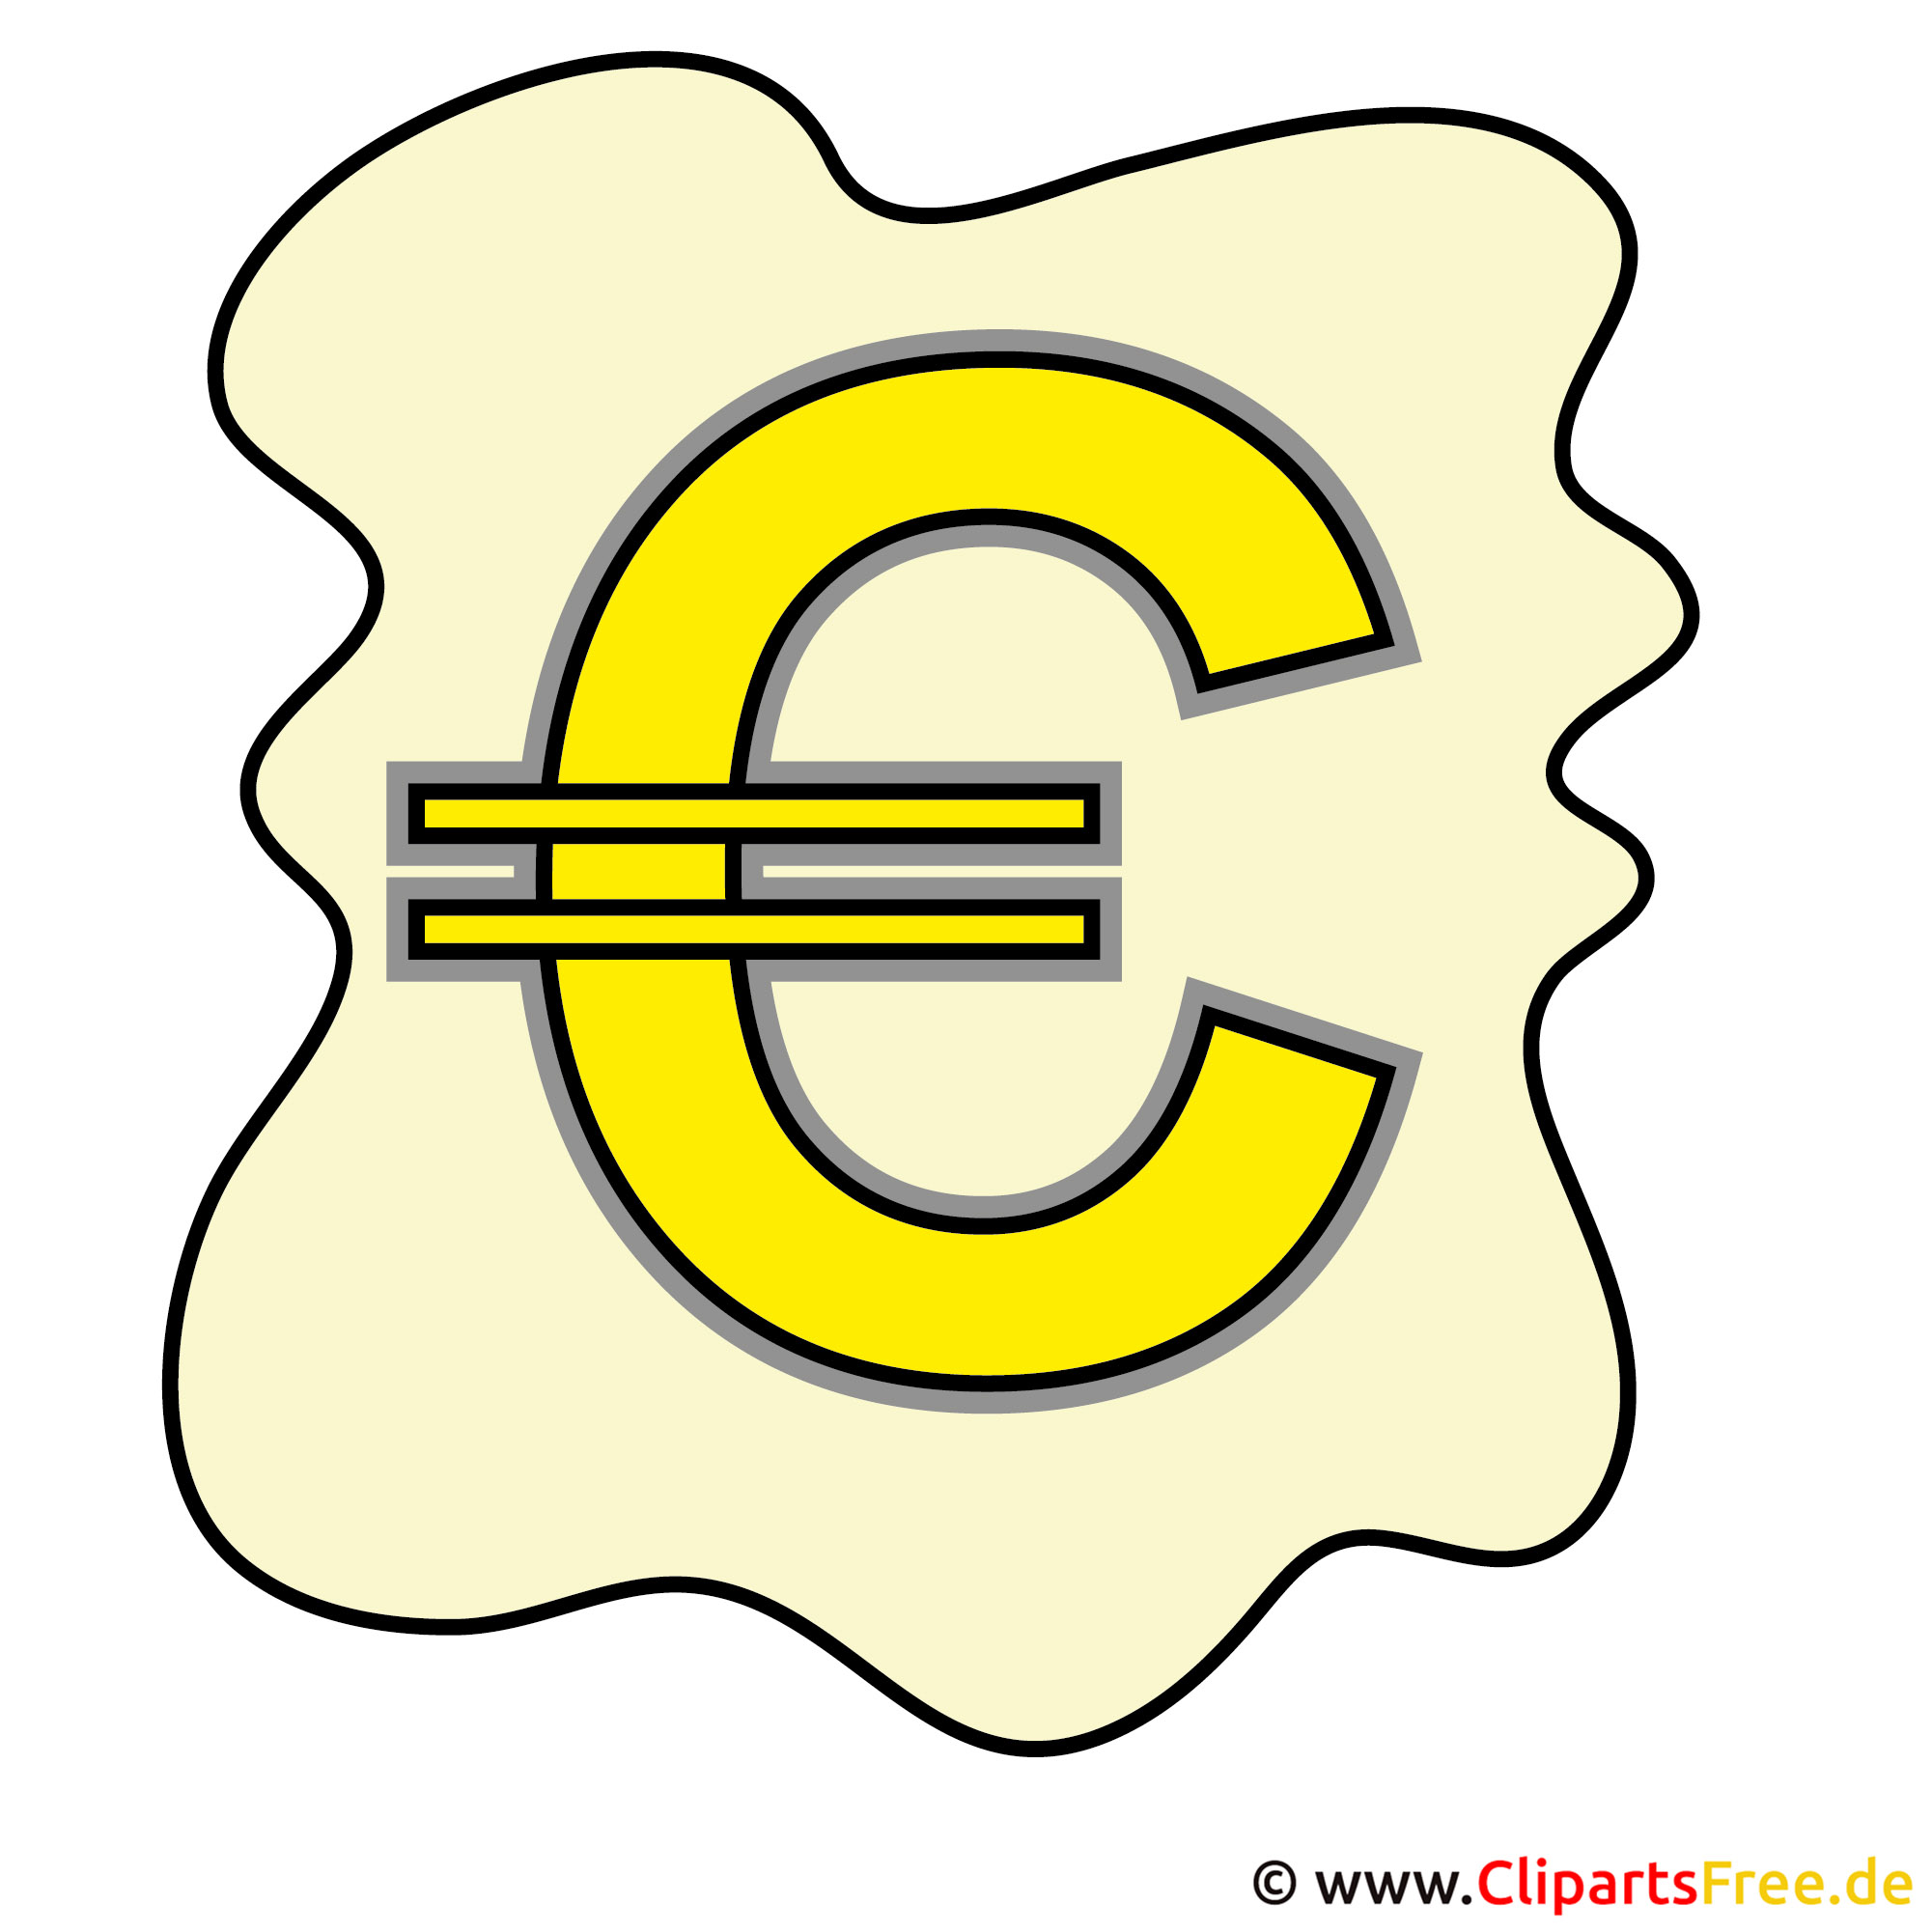 free clipart euro sign - photo #21